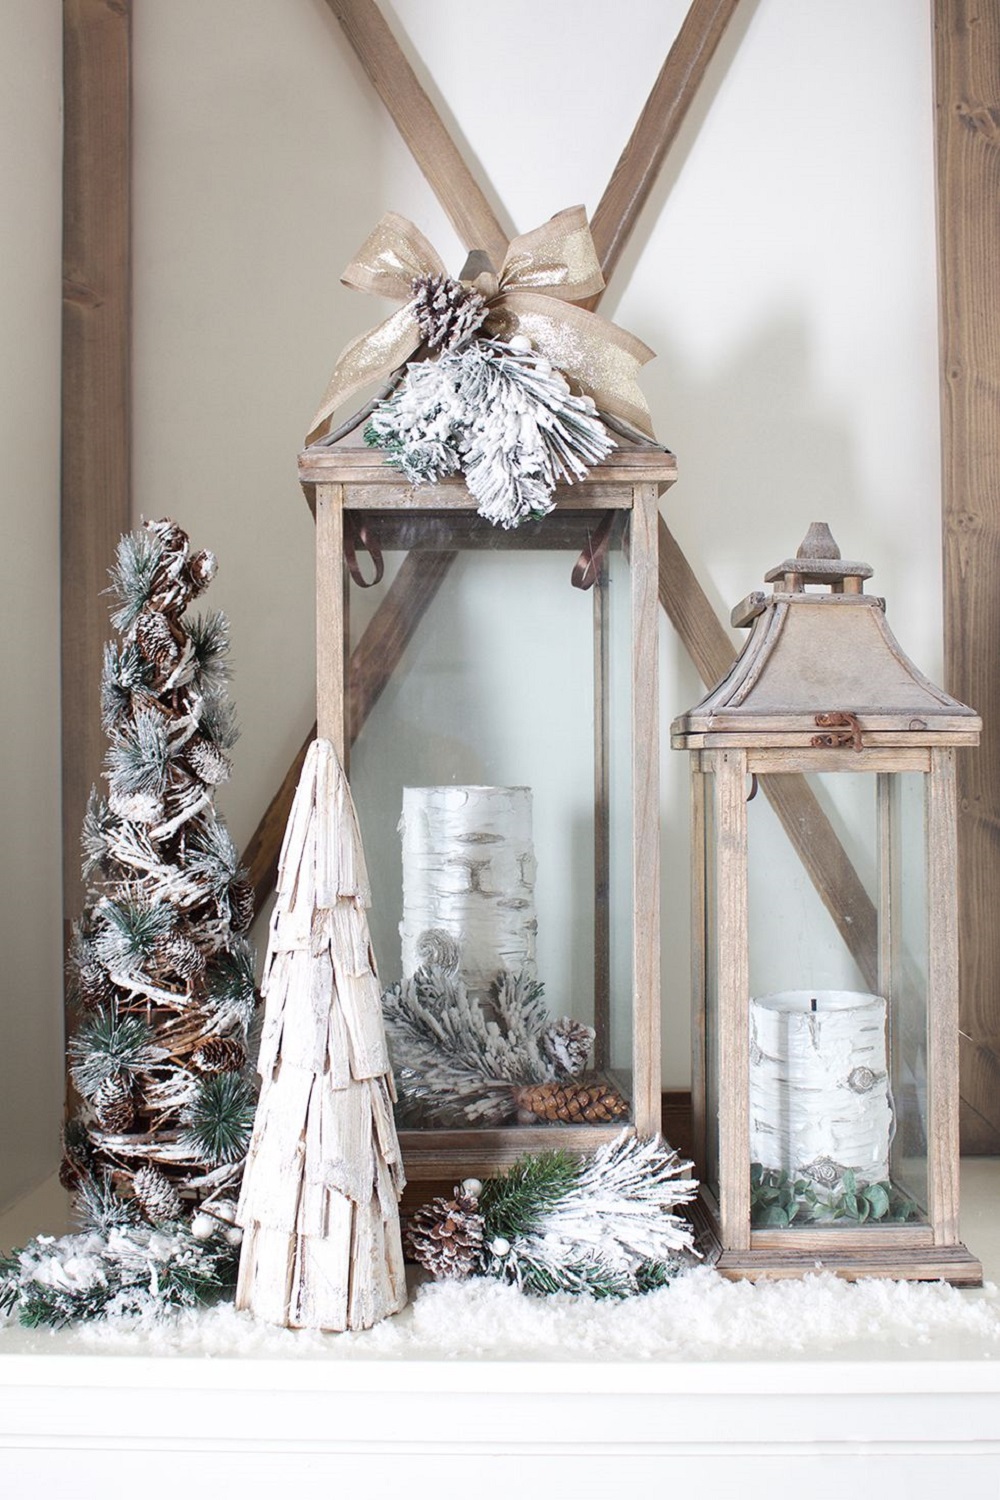 t4-1 Modern Christmas decorations ideas that are heartwarming